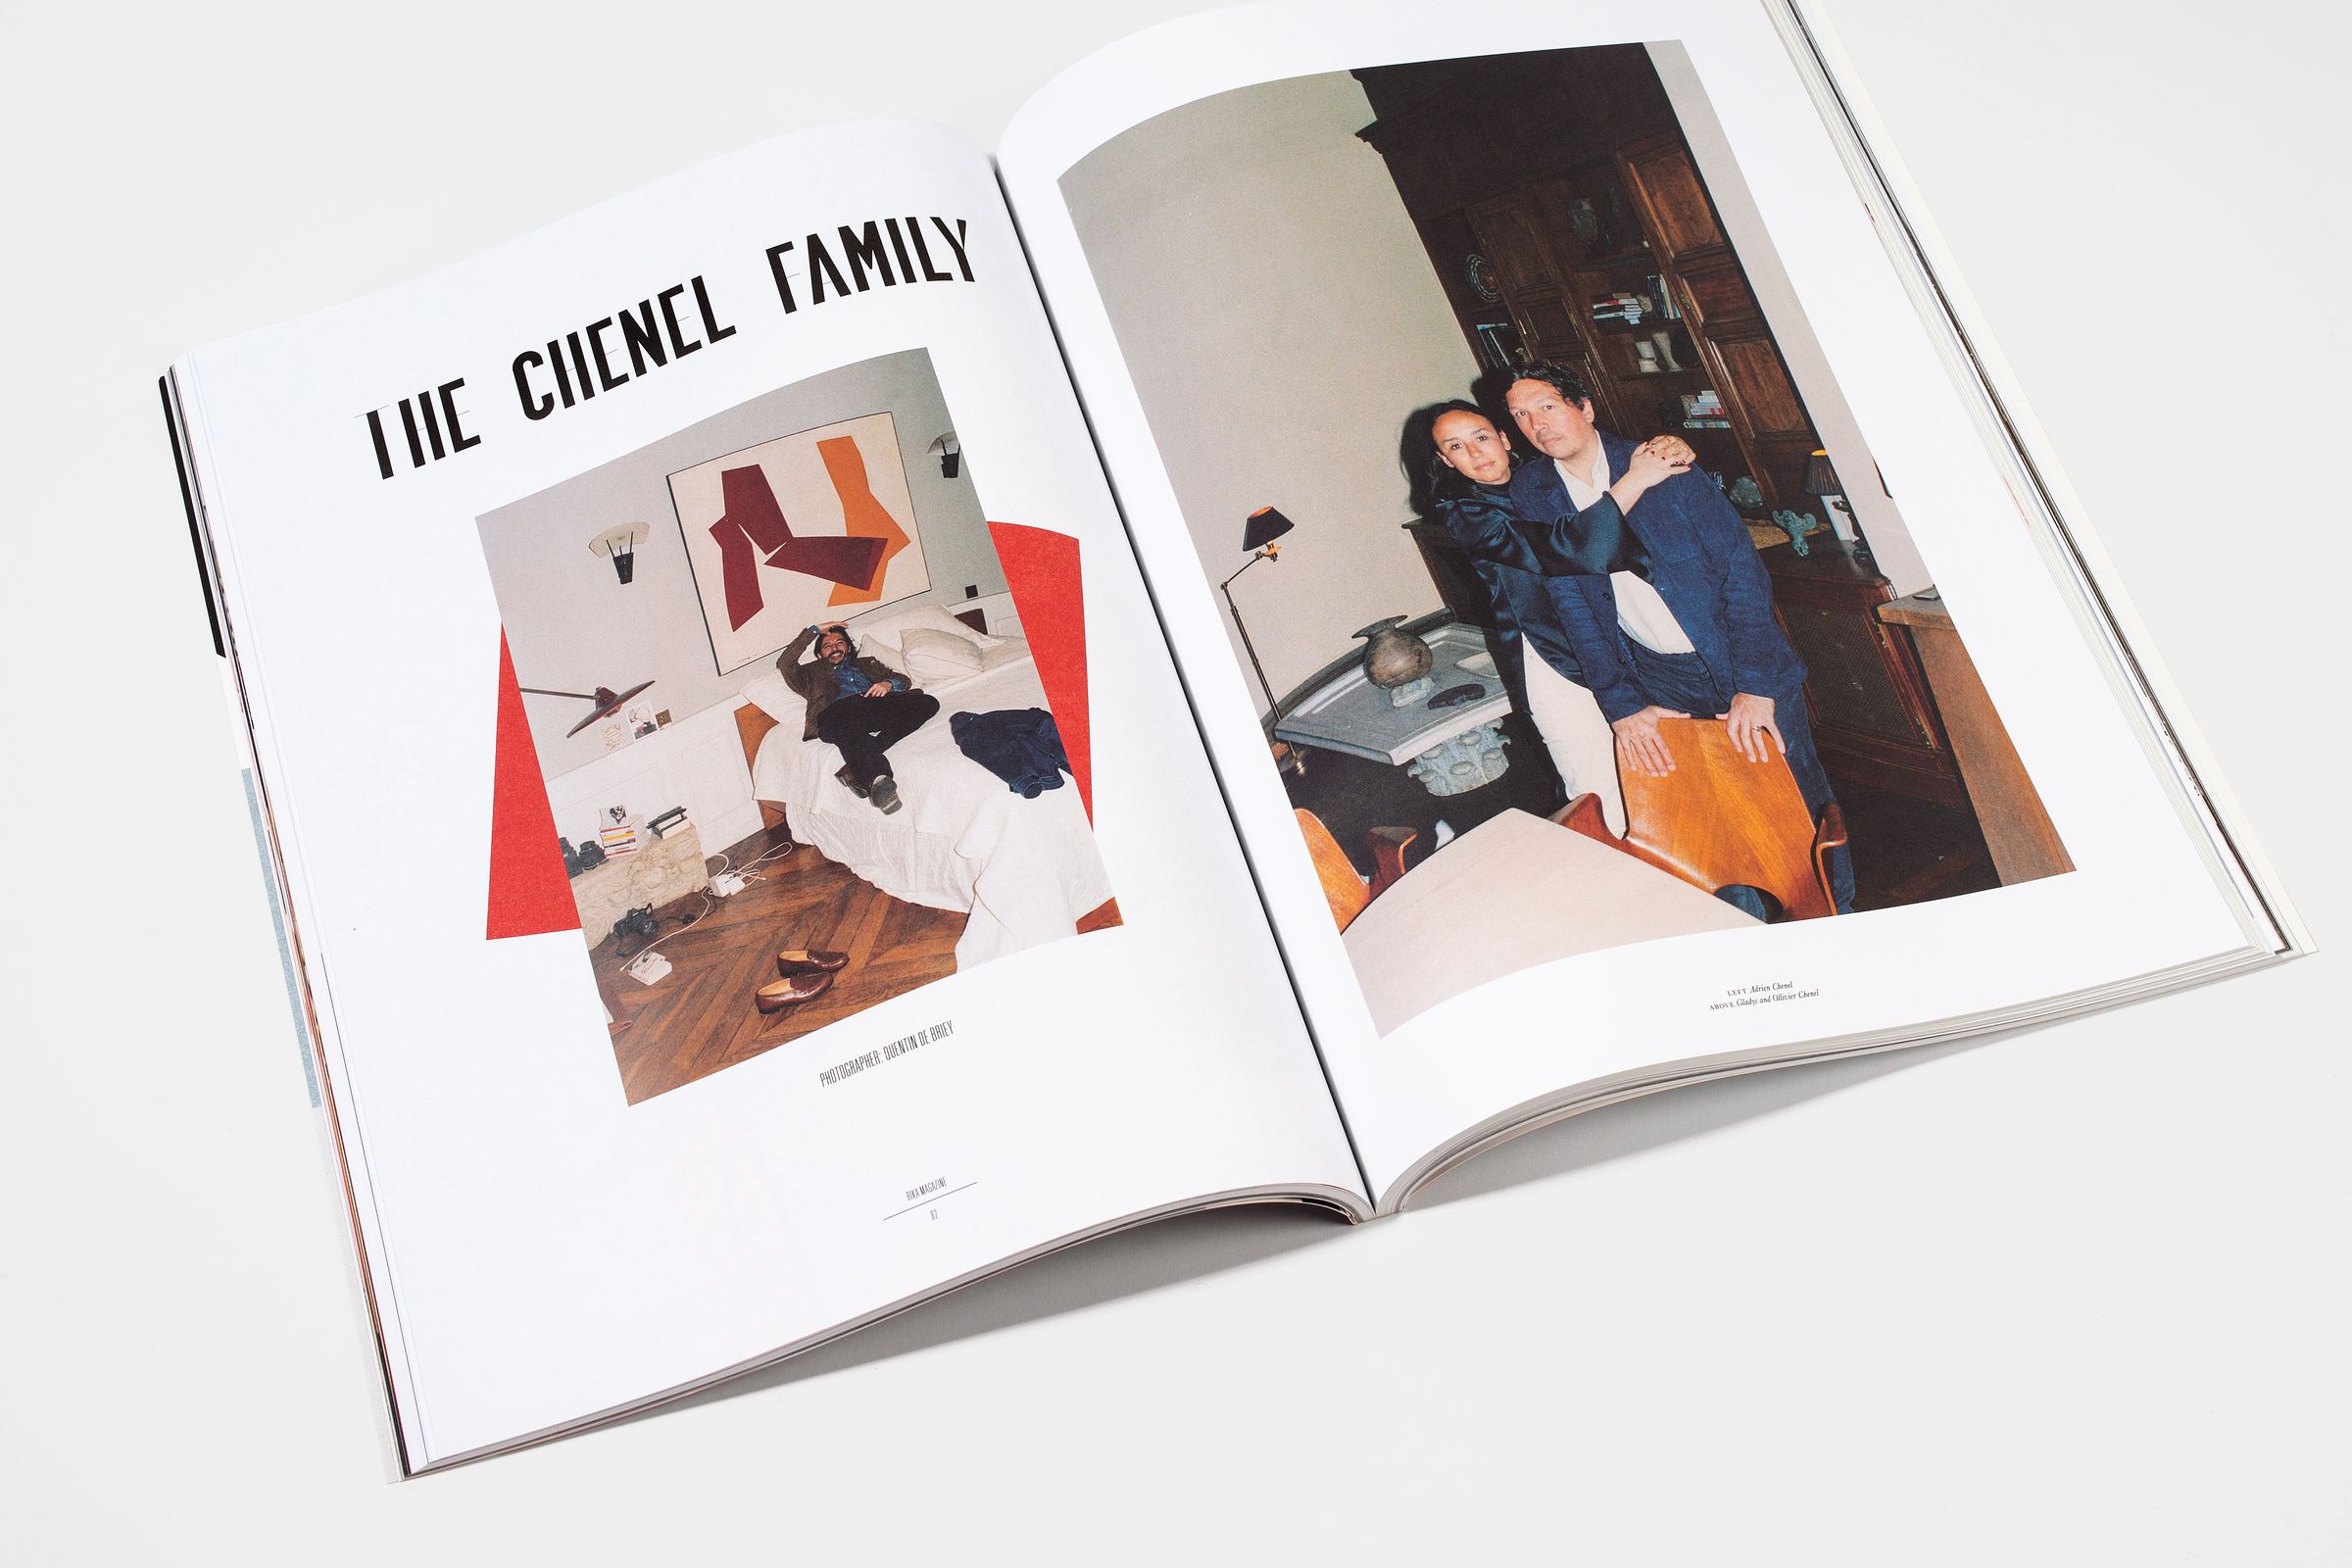 Rika Magazine issue no. 19 The Chenel Family photographed by Quentin de Briey